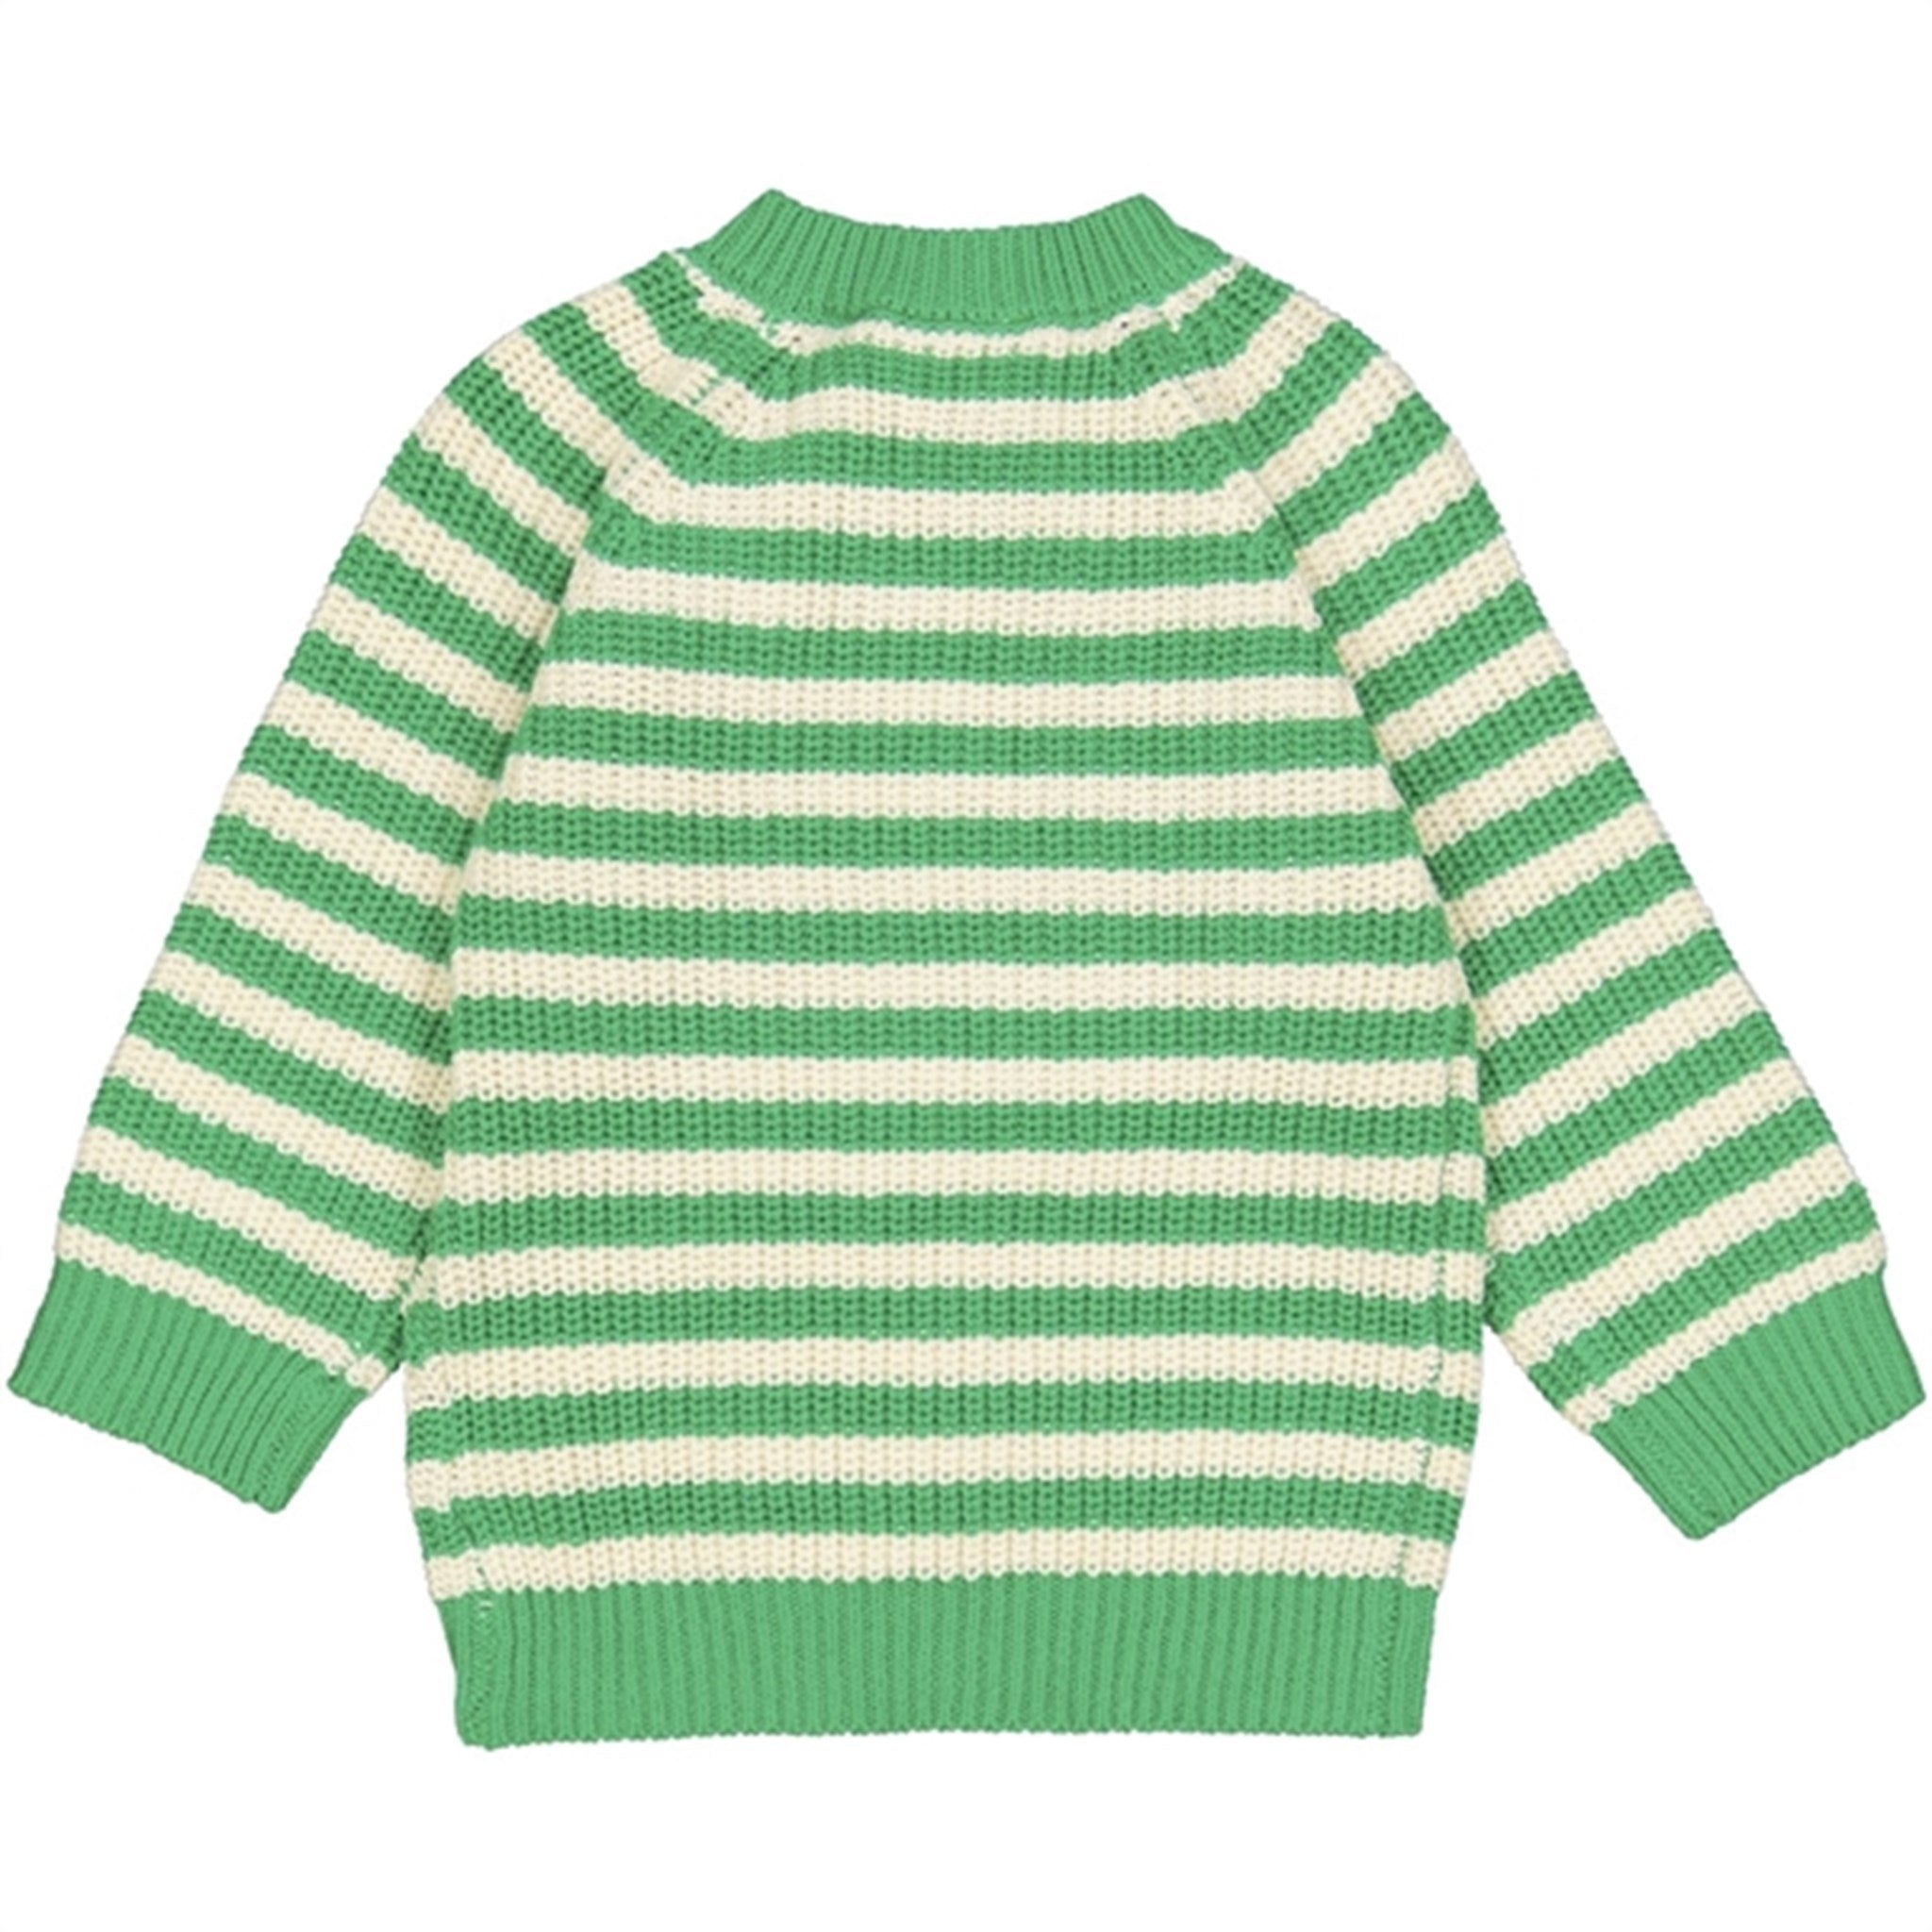 THE NEW Siblings Bright Green Ilfred Strik Sweater 5